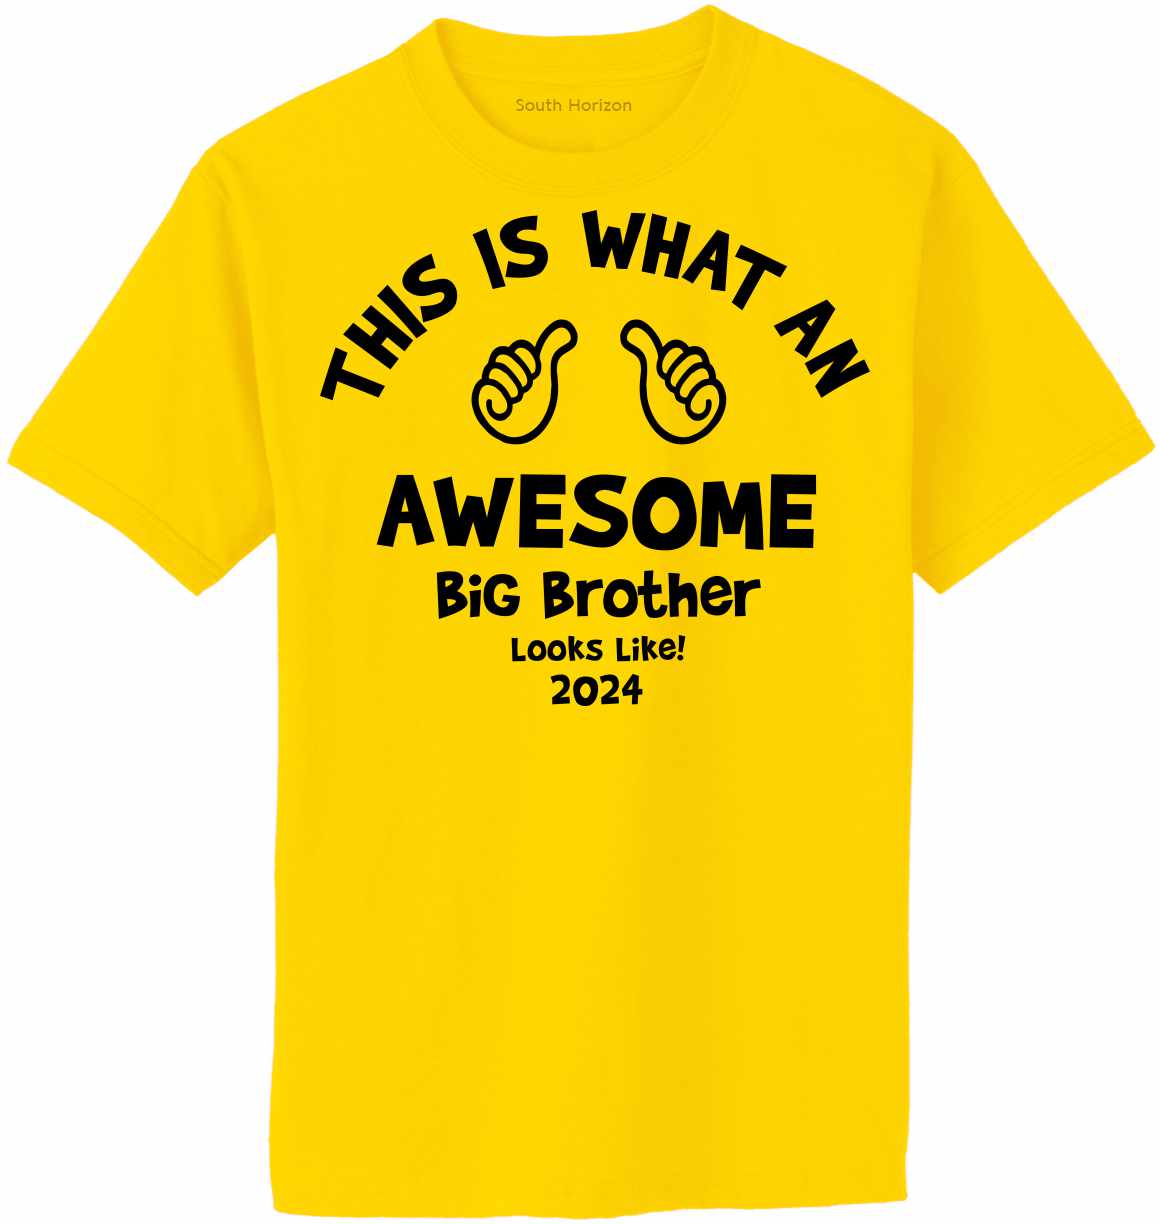 Awesome Big Brother in 2024 on Adult T-Shirt (#1363-1)